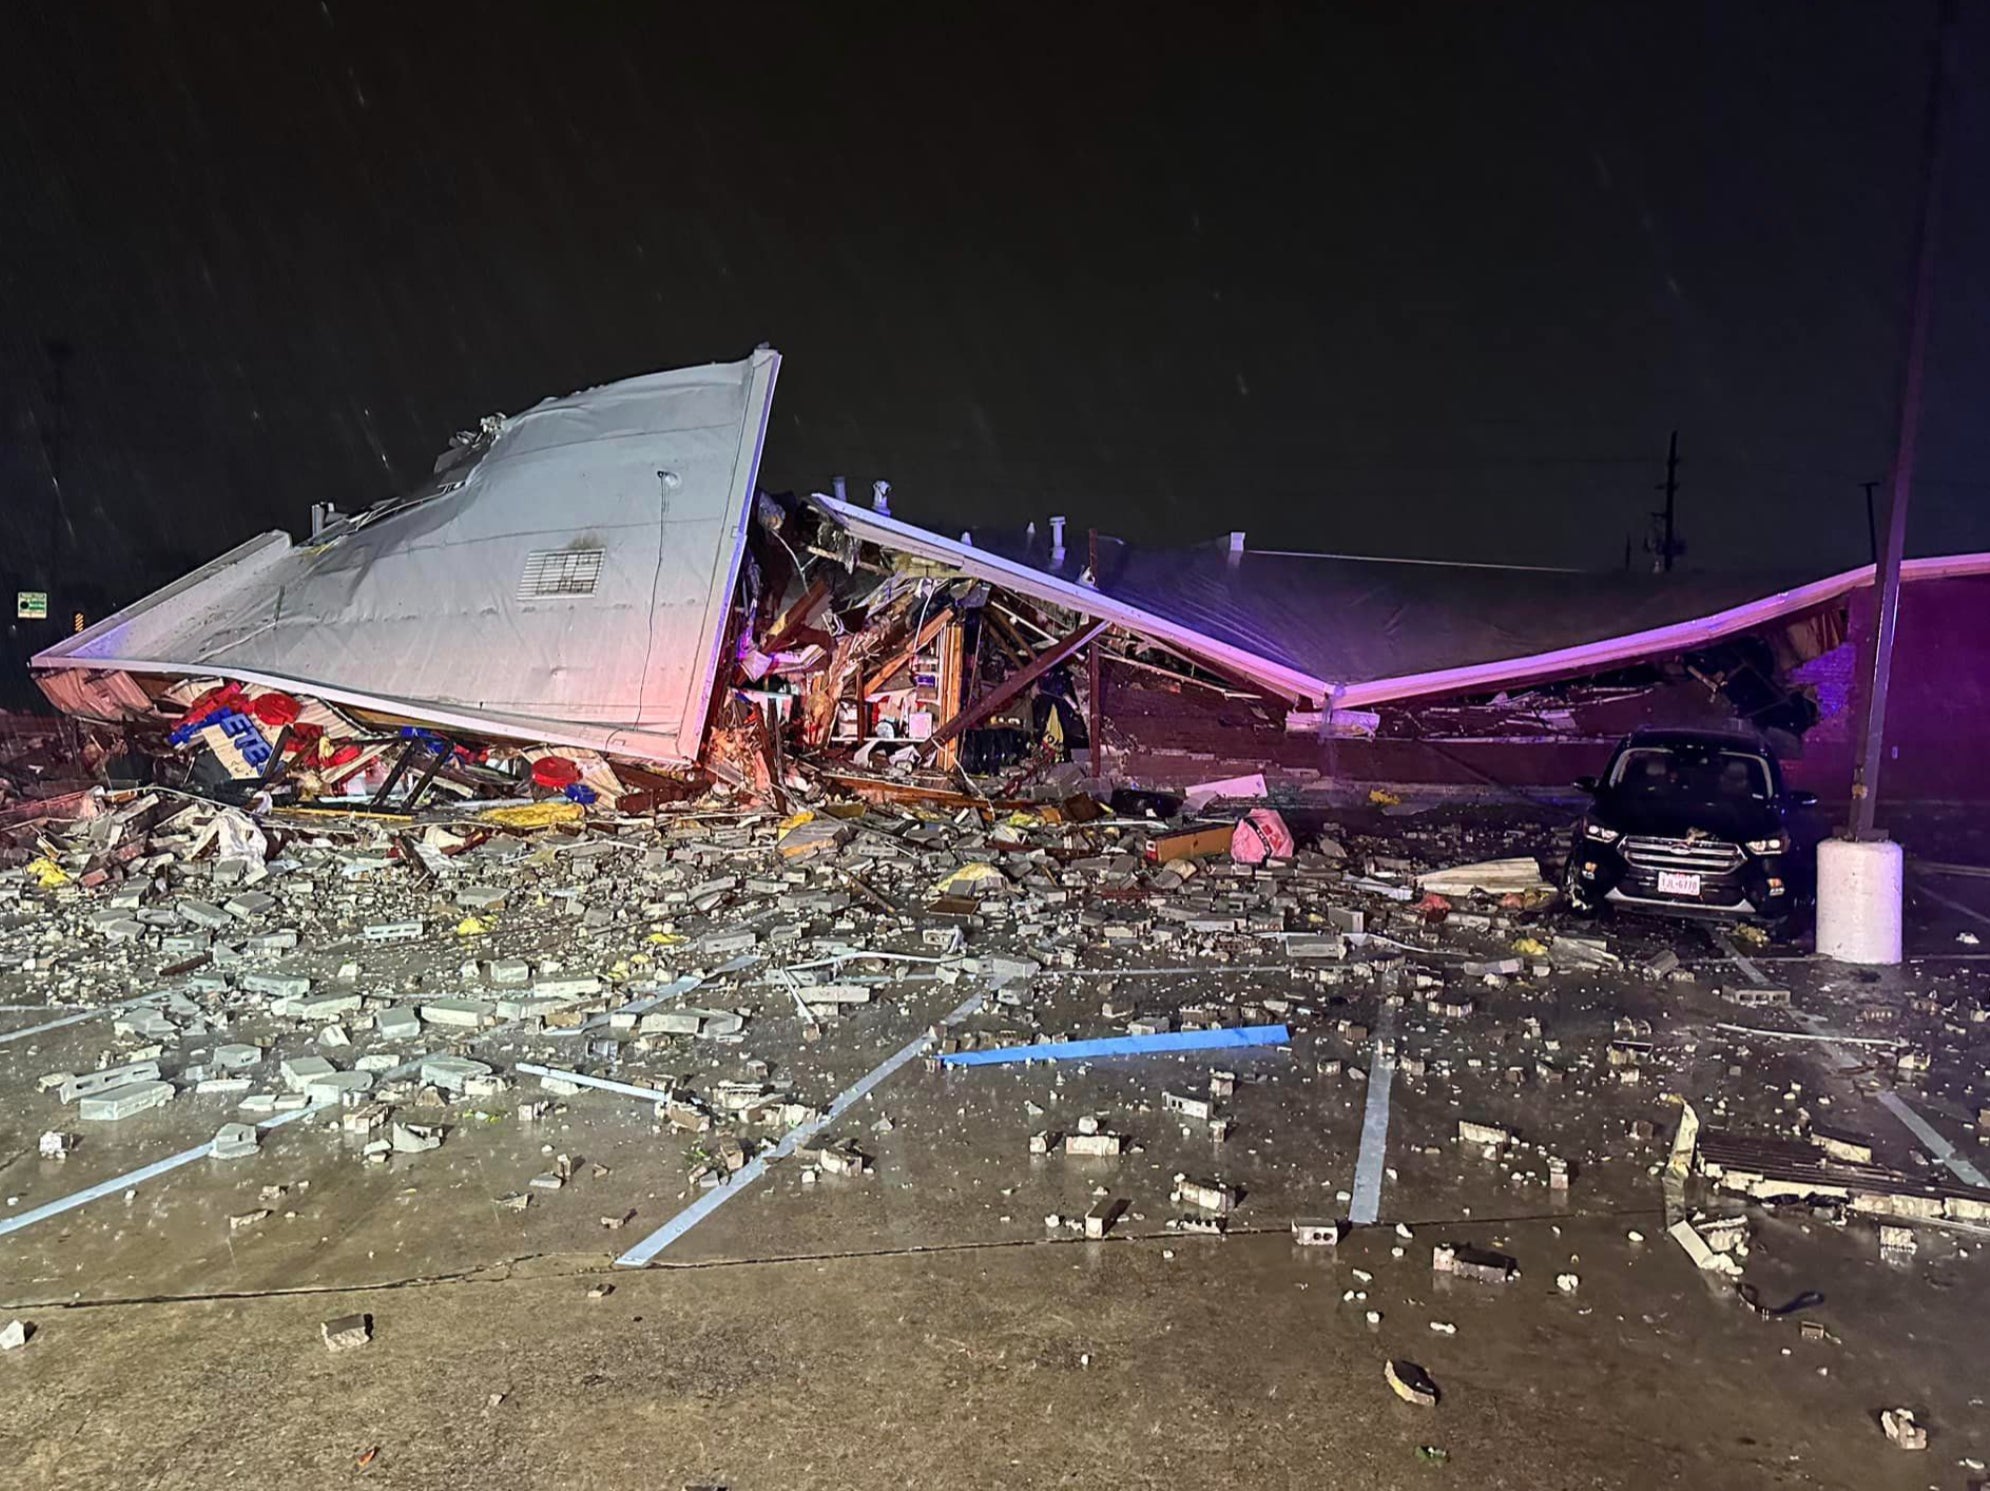 A building is reduced to rubble after severe storms hit Katy, Texas on 10 April